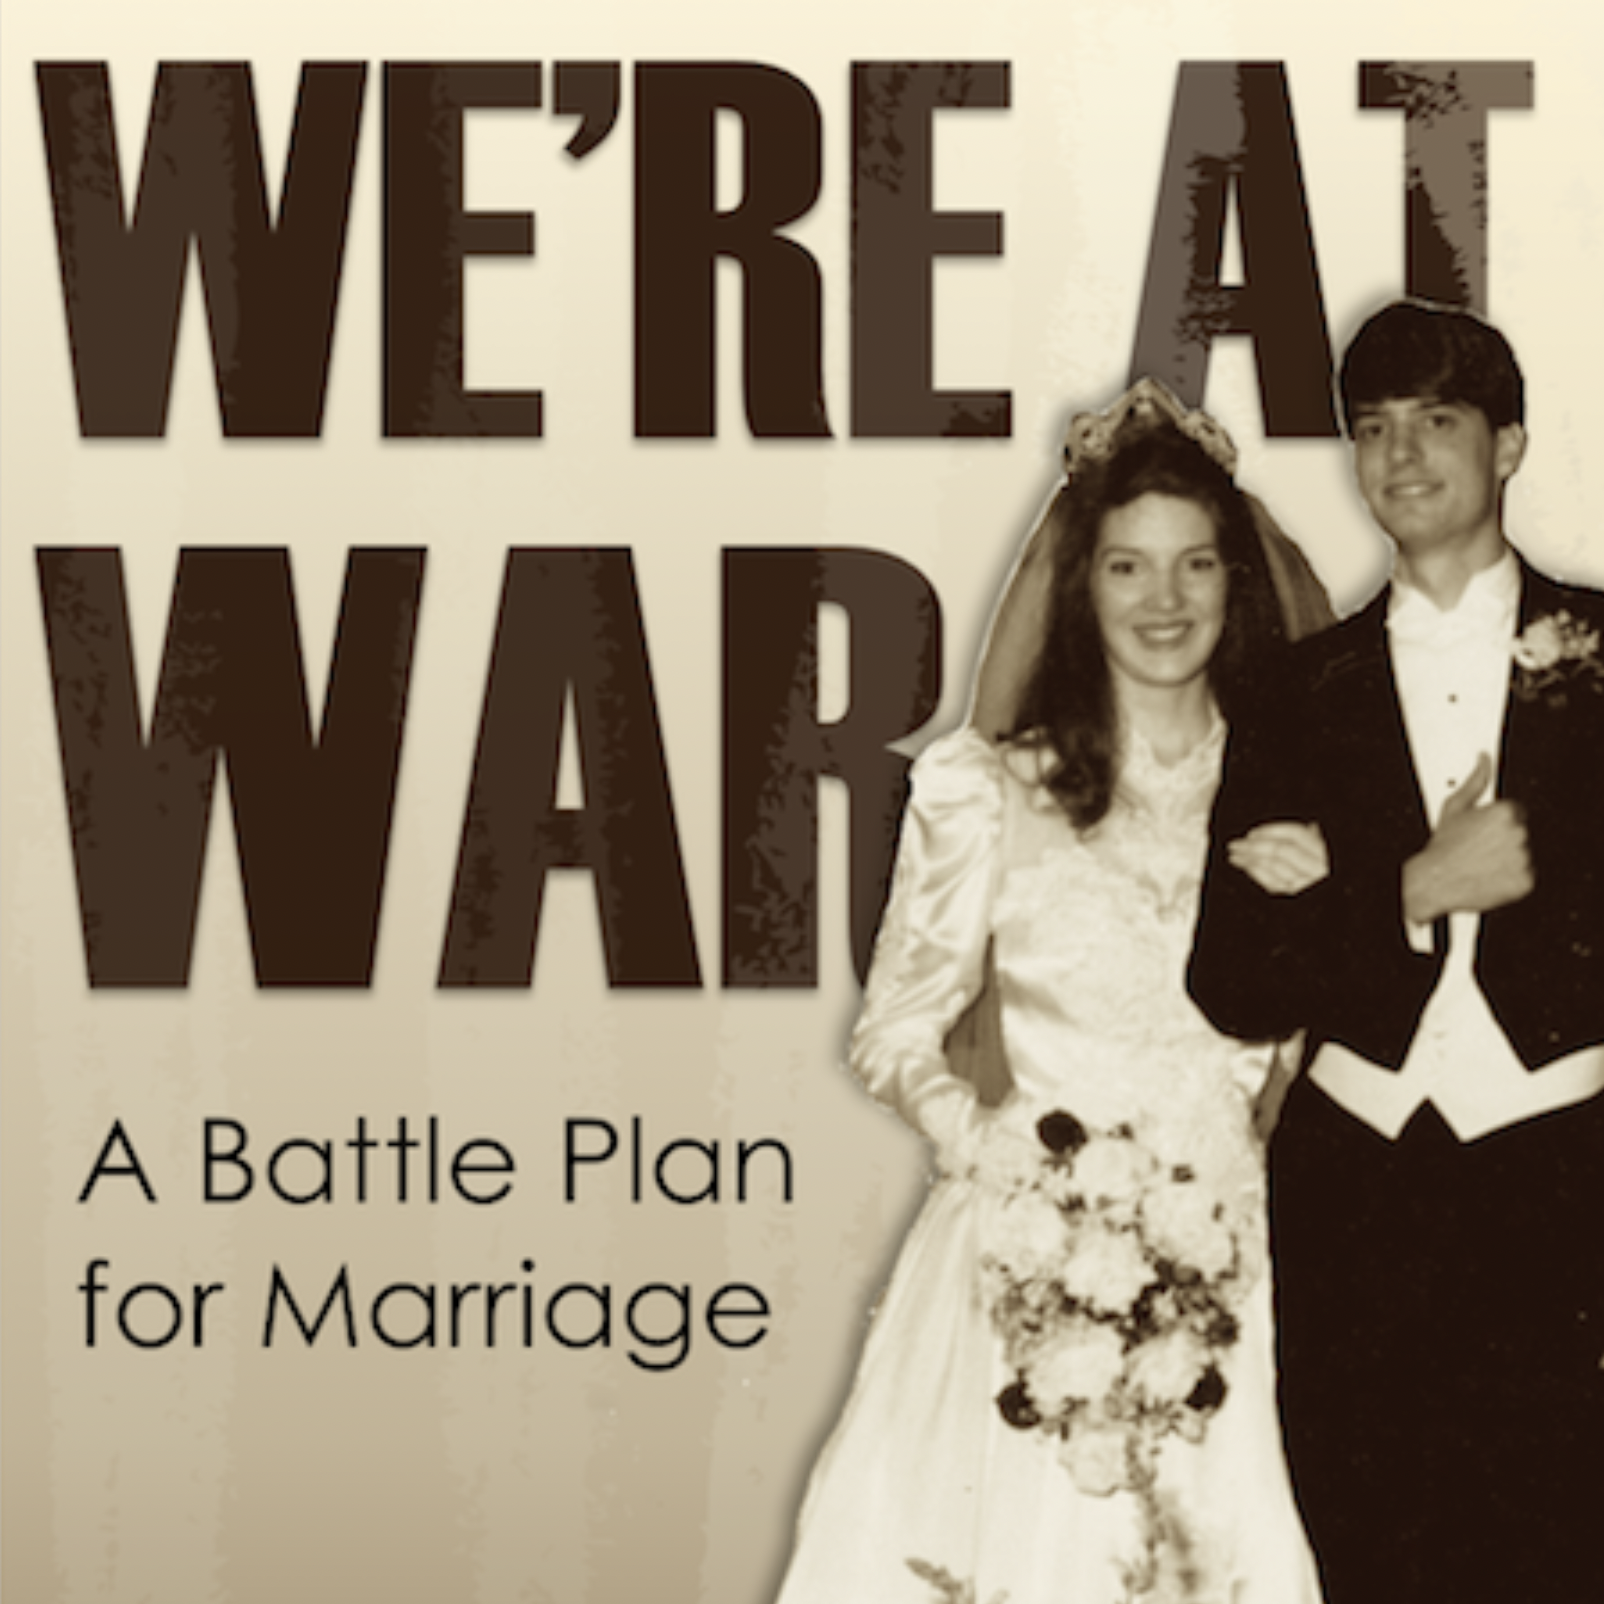 A Battle Plan for Marriage